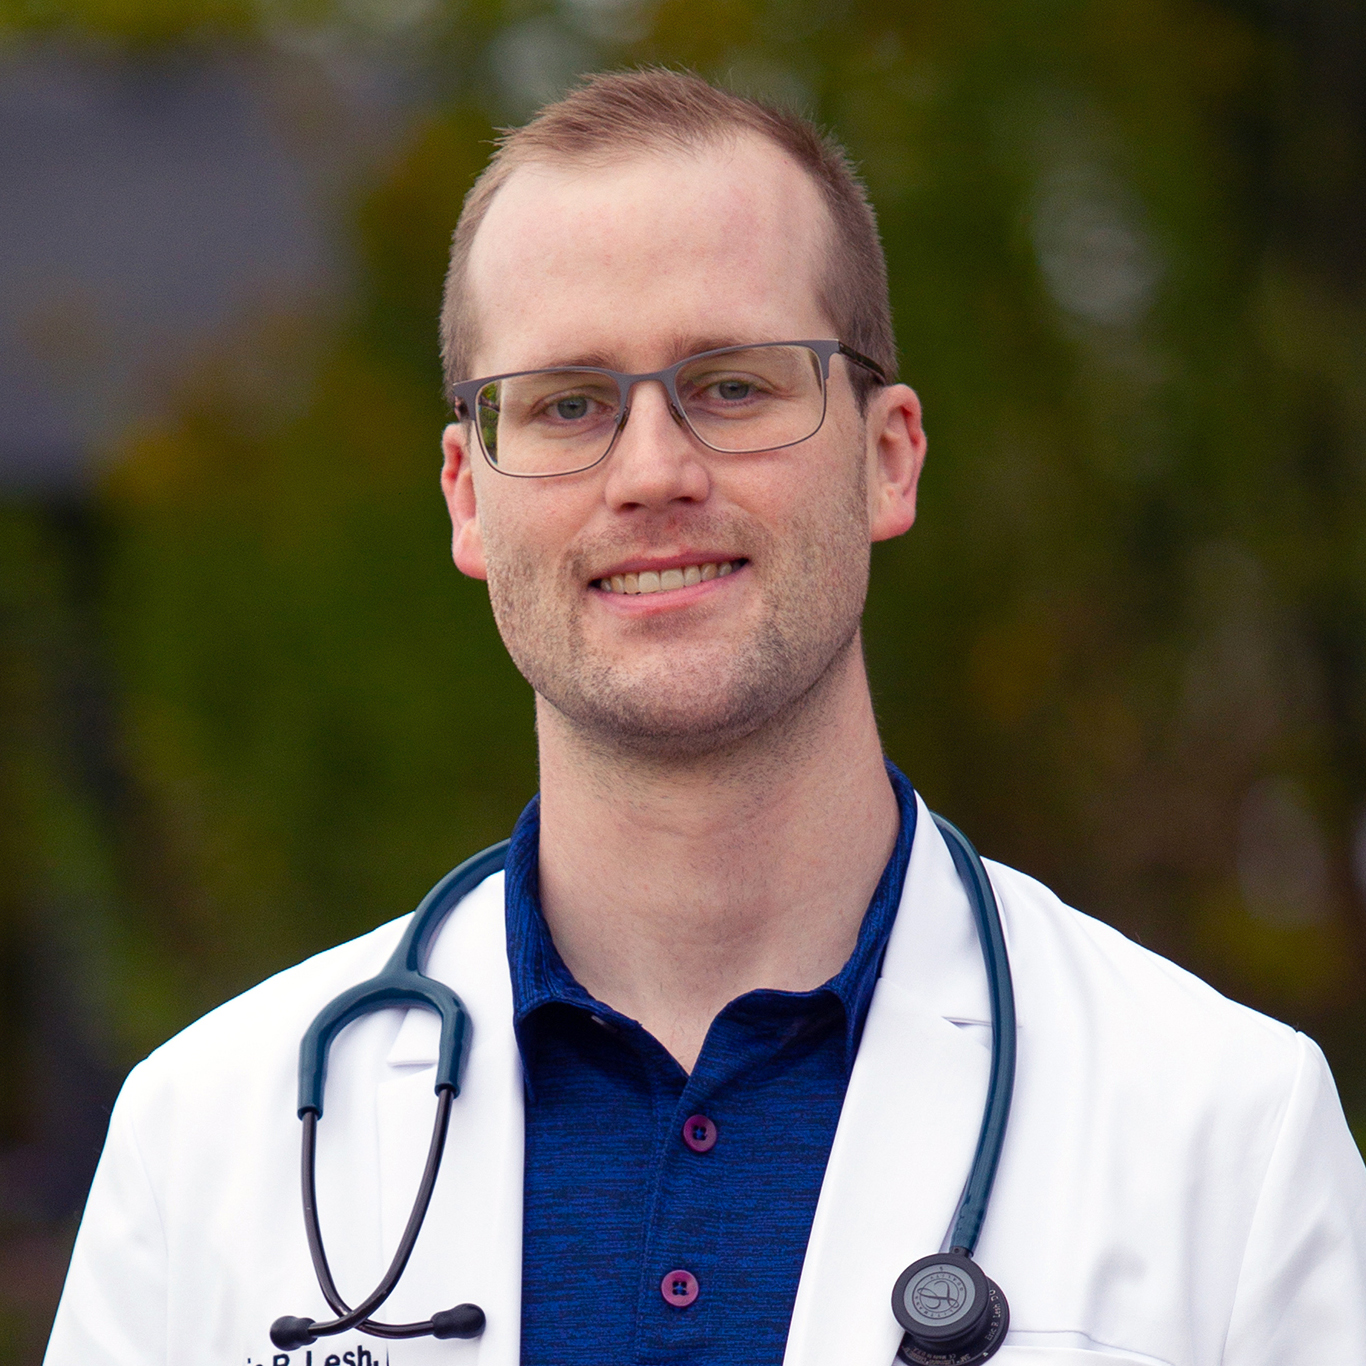 Eric Lesh, DO, '18, assistant professor, family medicine, at A.T. Still University's Kirksville College of Osteopathic Medicine